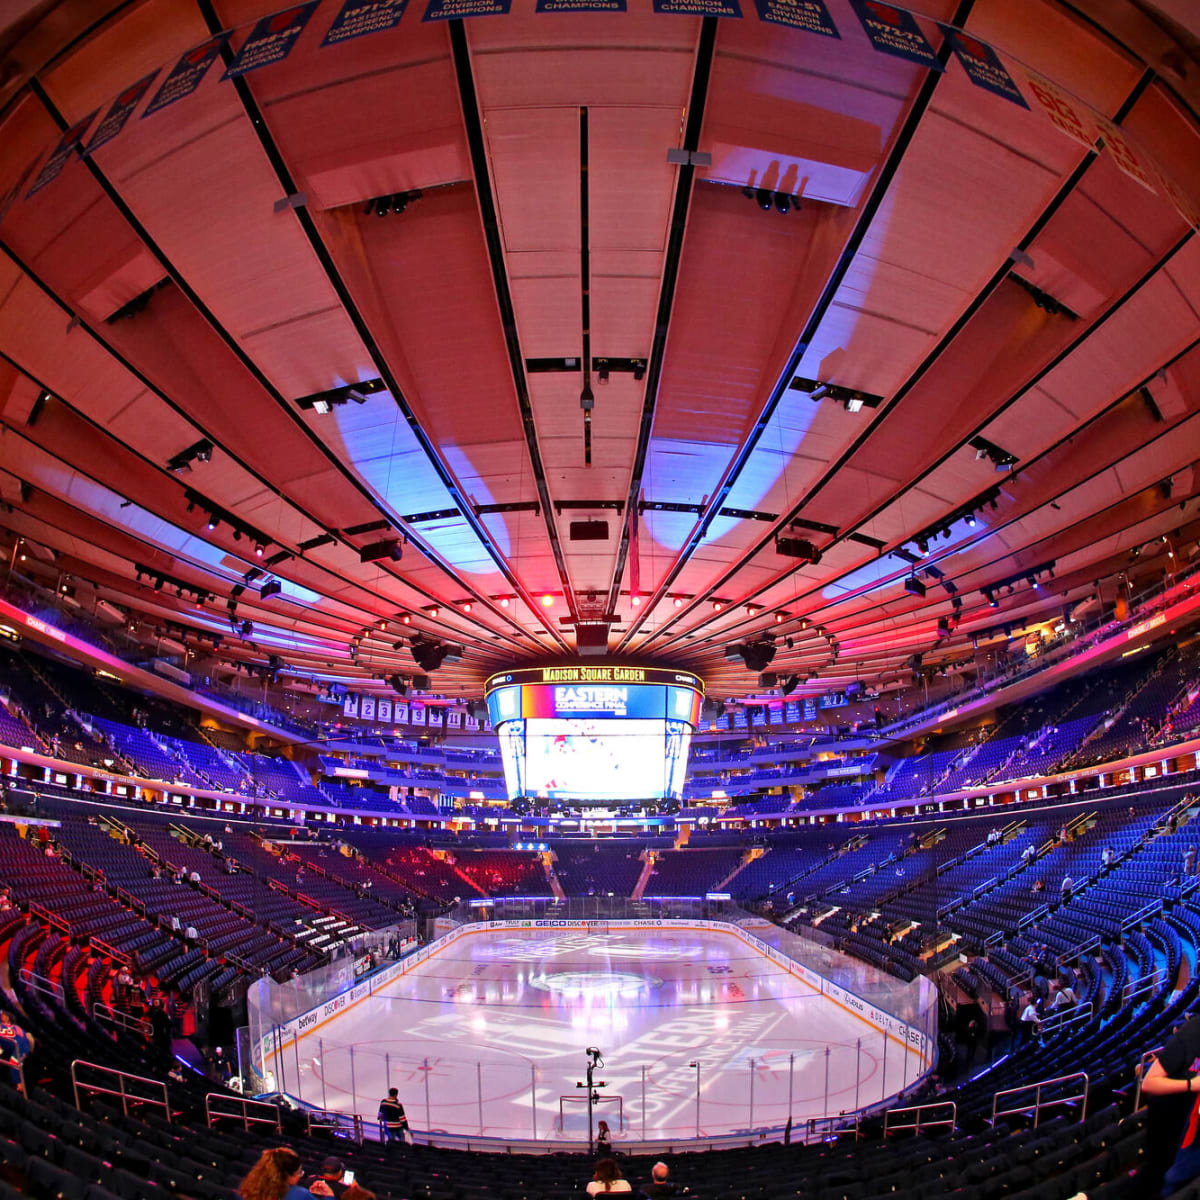 Sucker-punching Rangers fan banned by Madison Square Garden